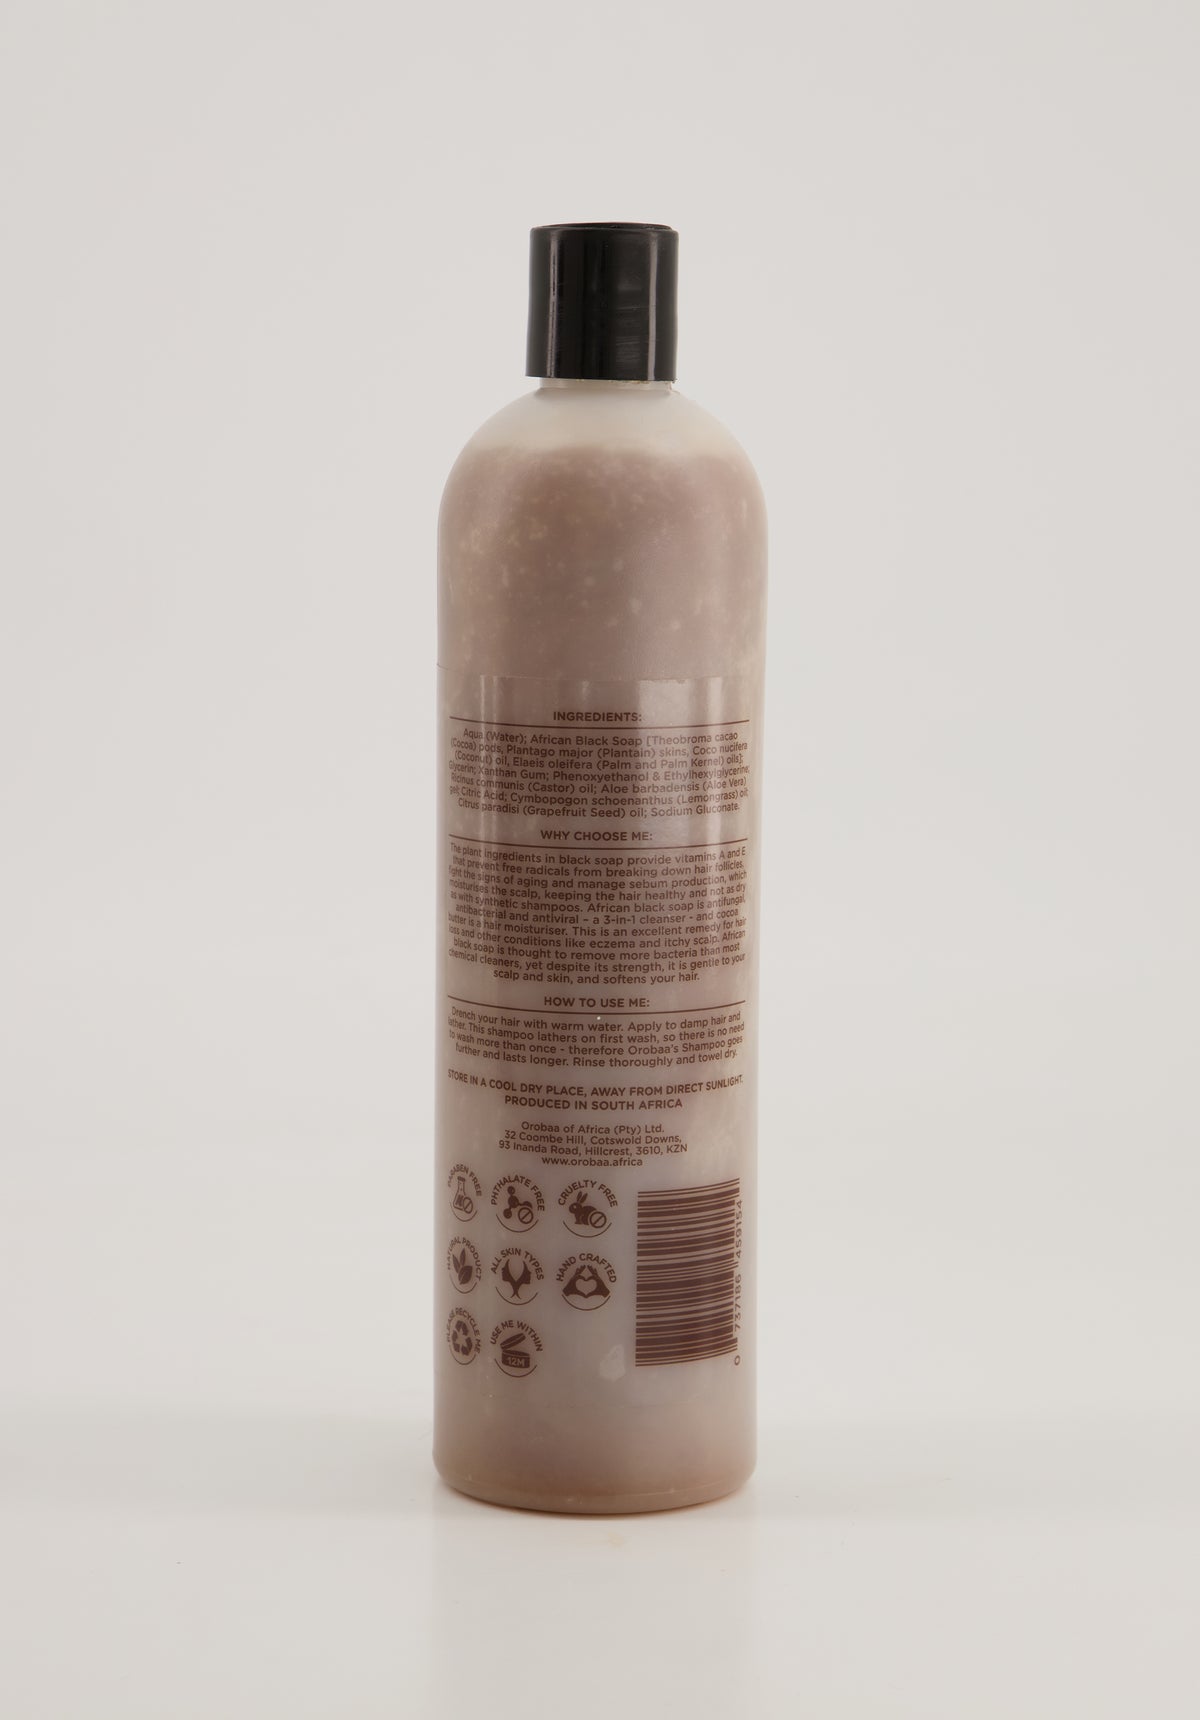 Shampoo with African Black Soap